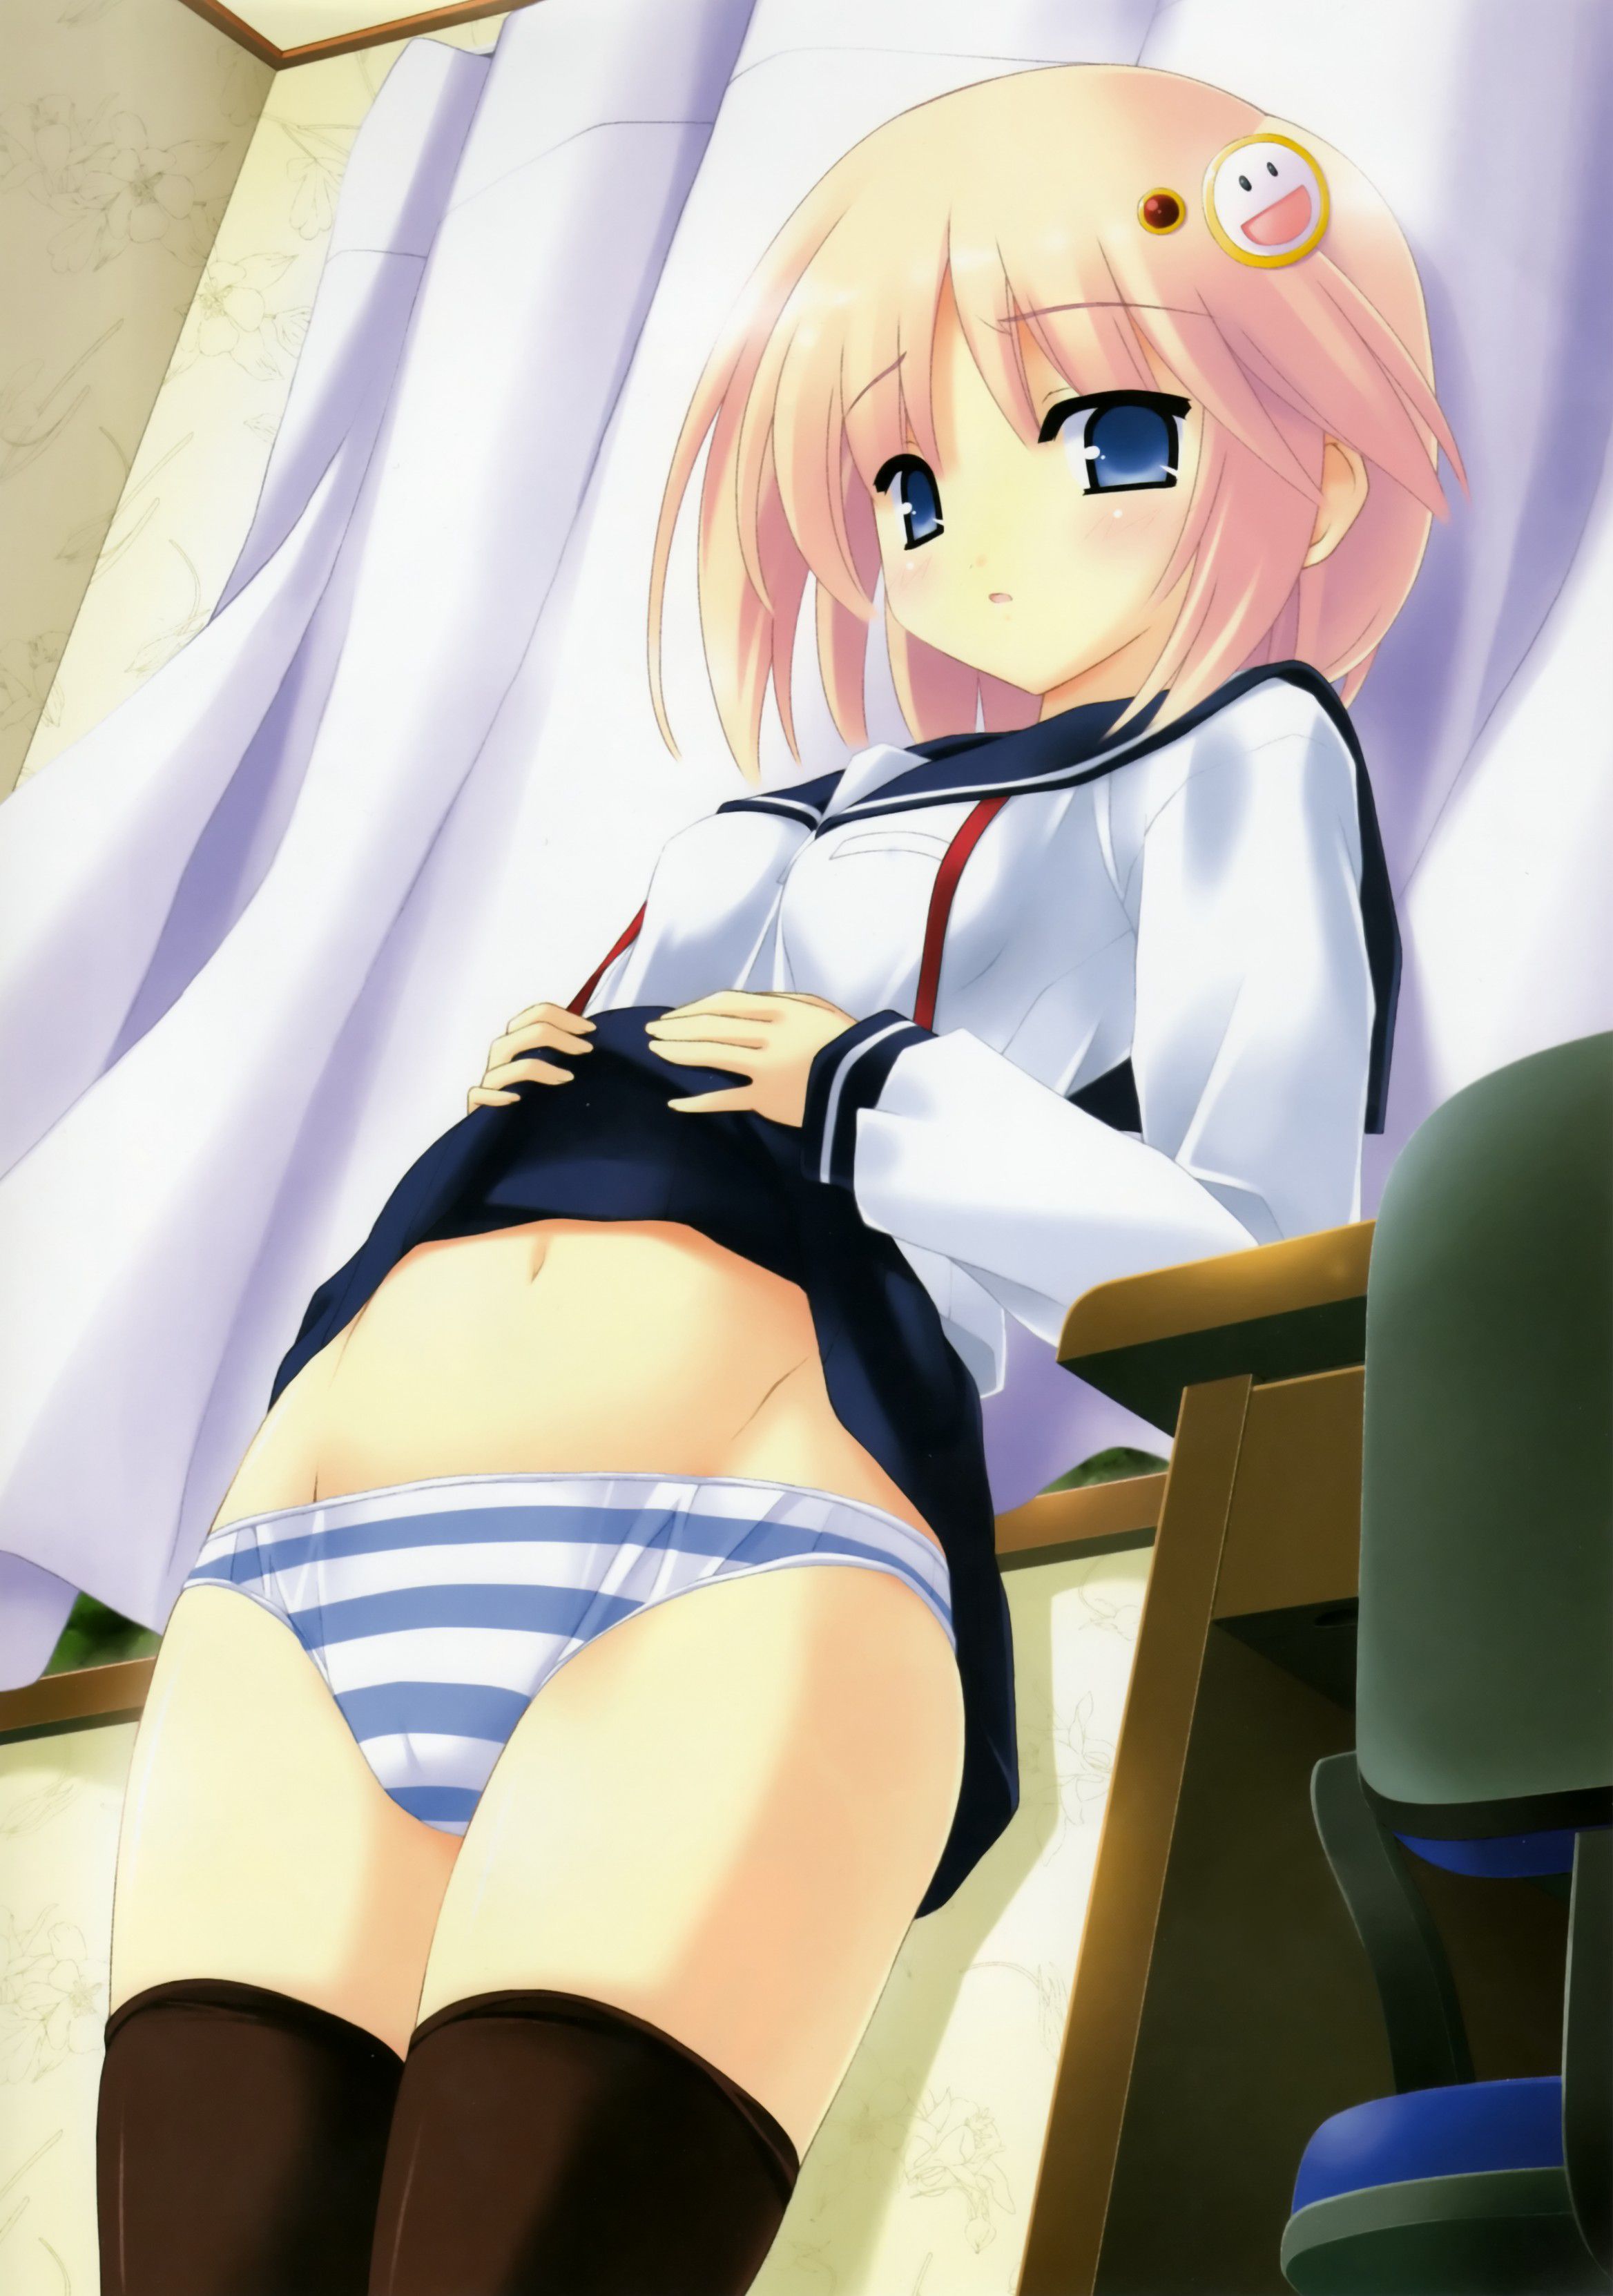 The thigh of the girl wearing thighhighs is too erotic. 10